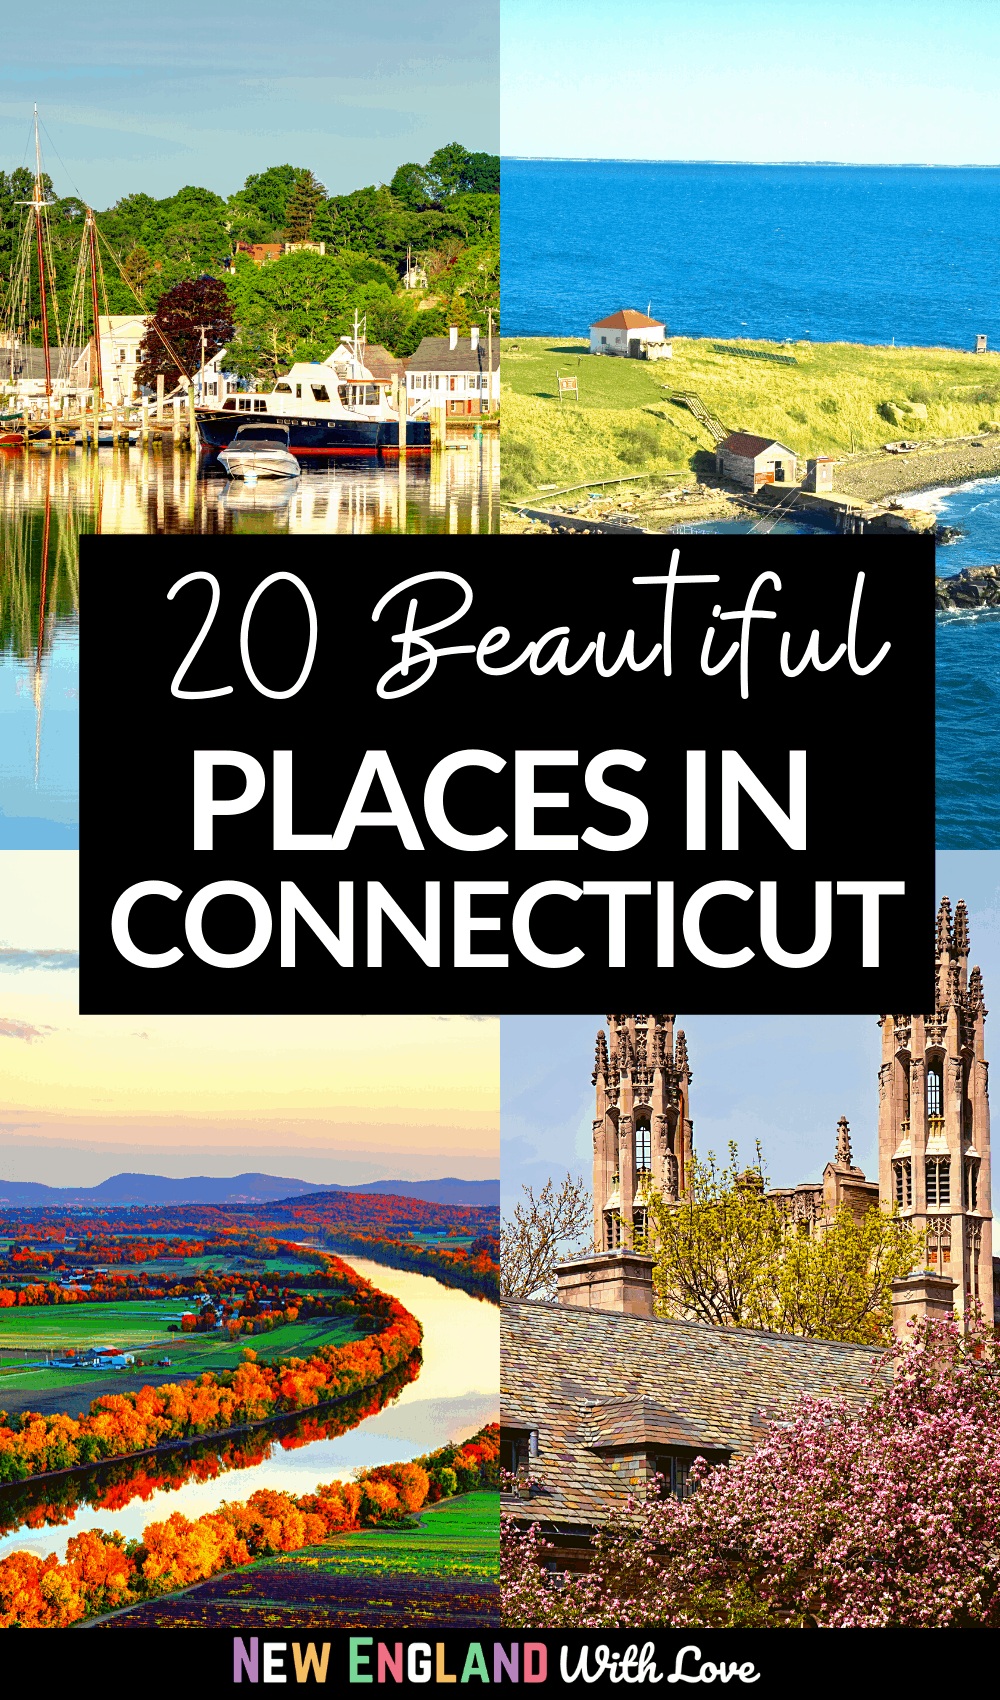 Pinterest graphic reading "20 Beautiful PLACES IN CONNECTICUT"